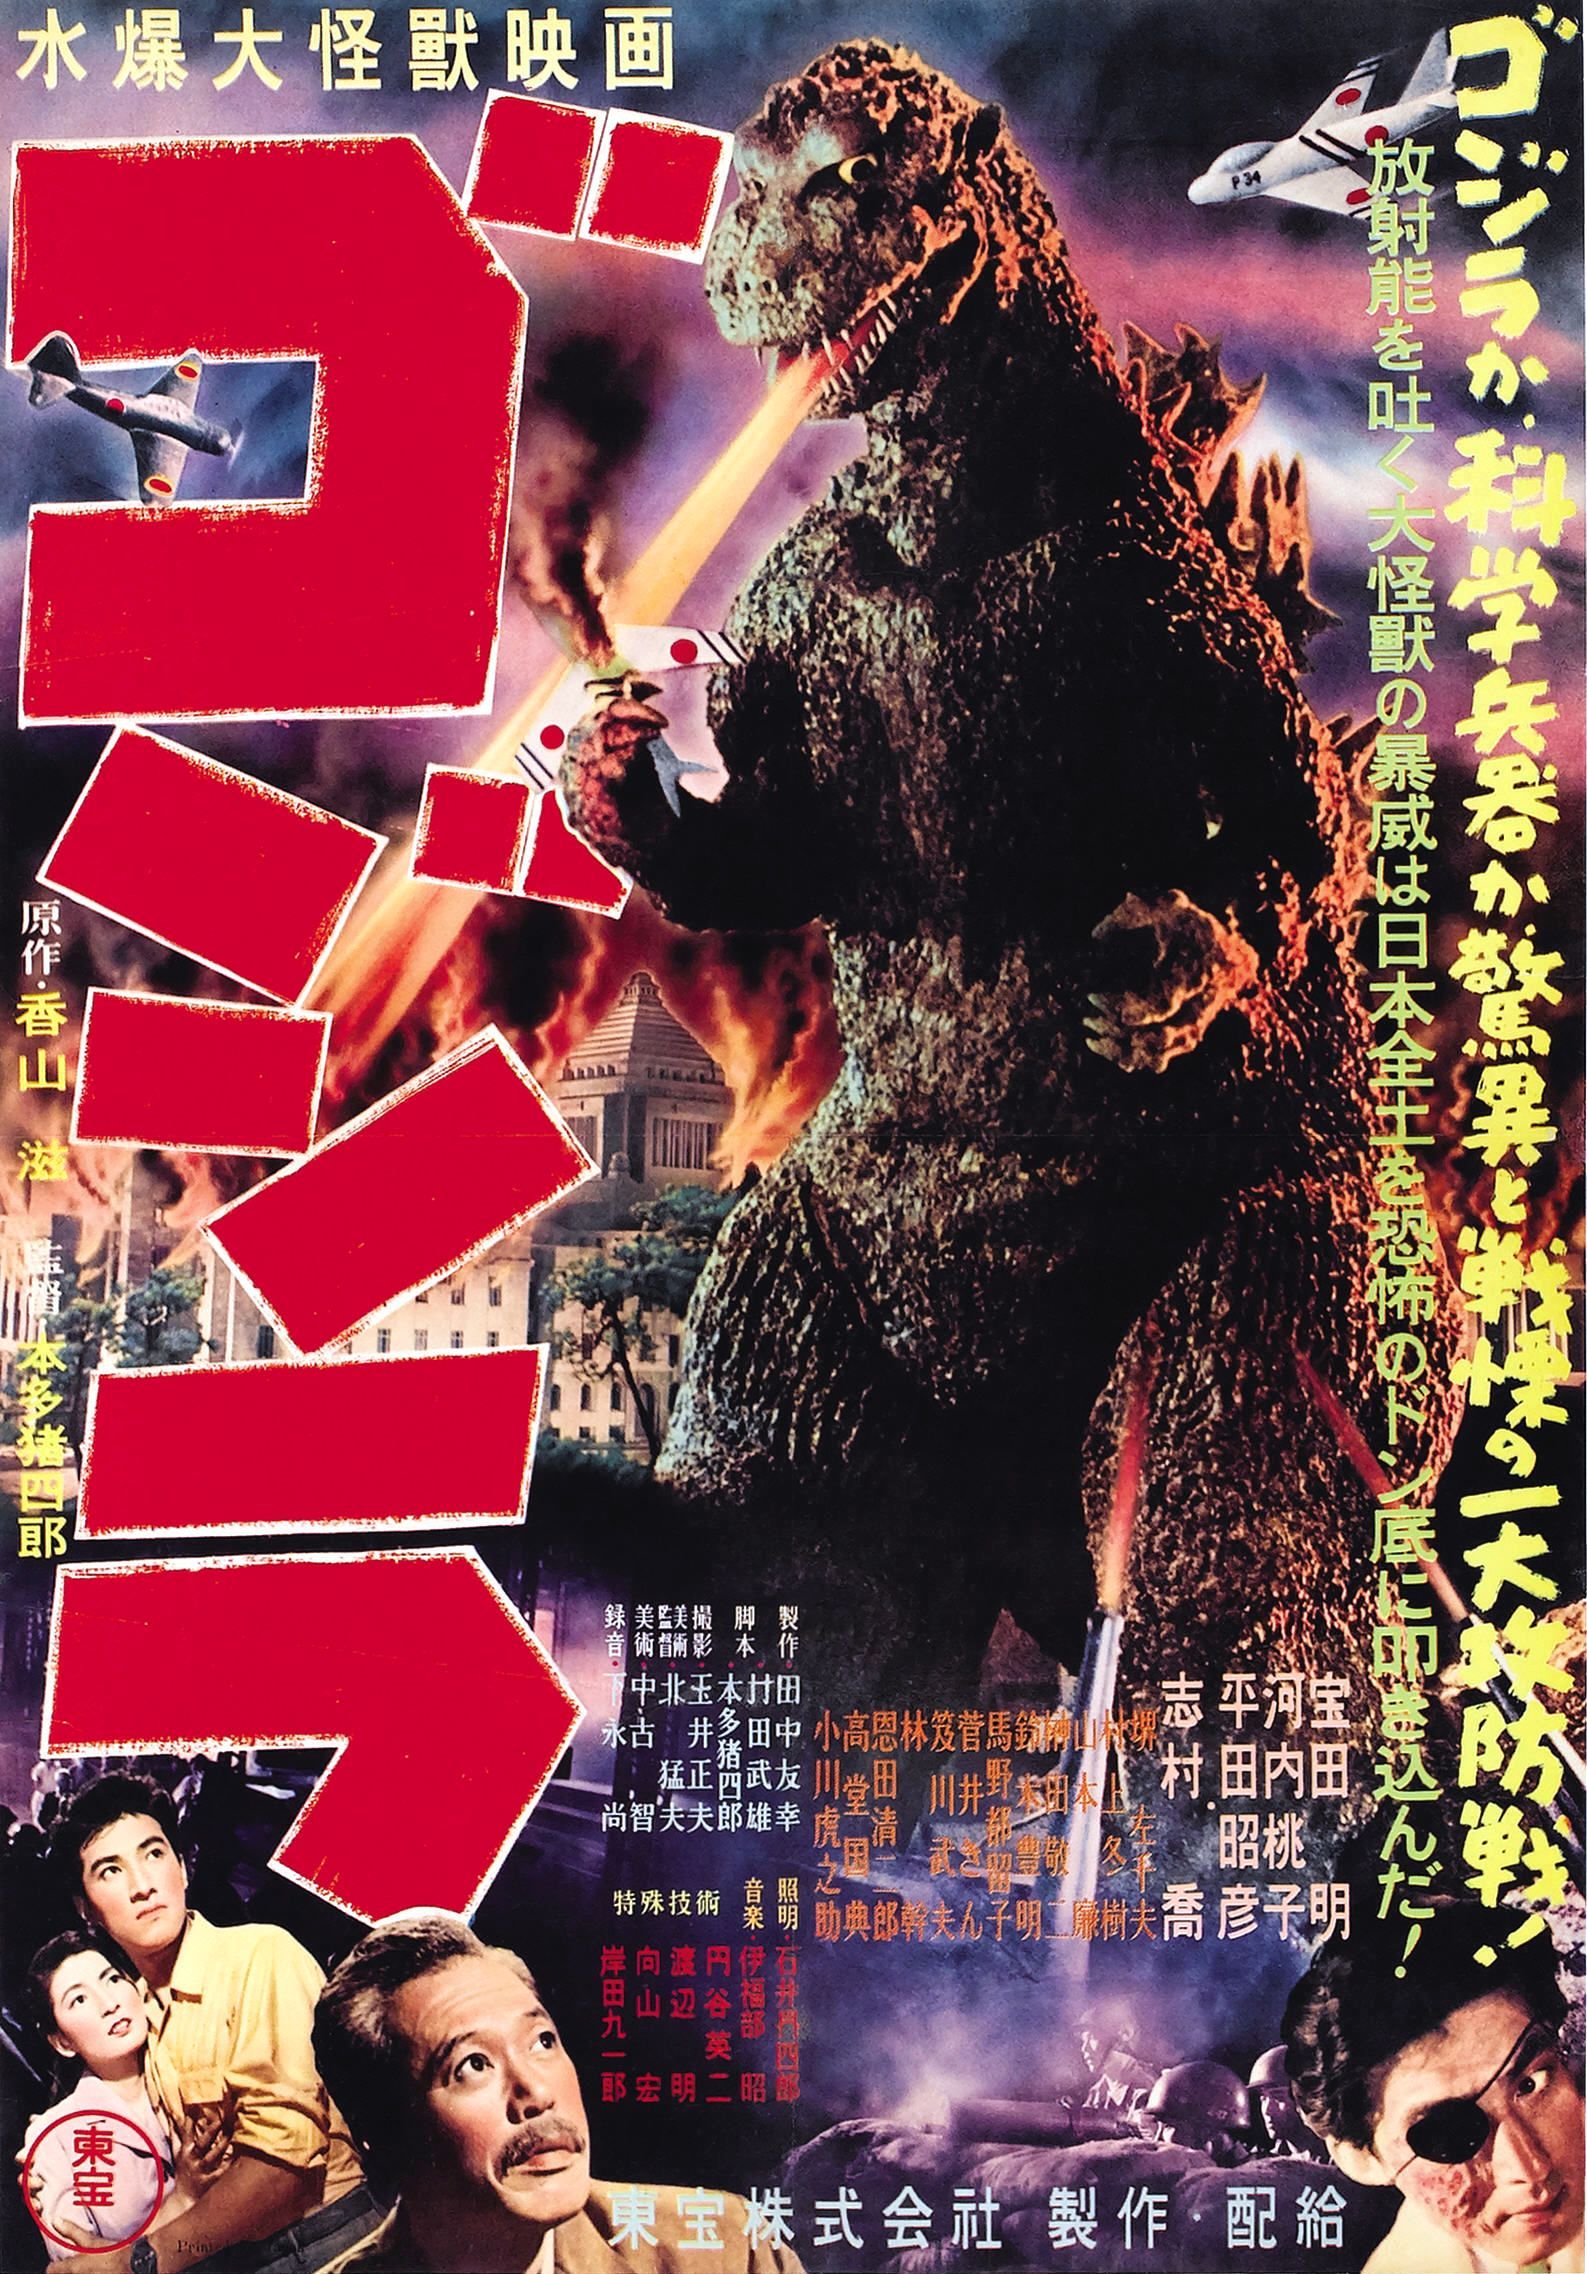 10 monsters godzilla has fought the most, ranked